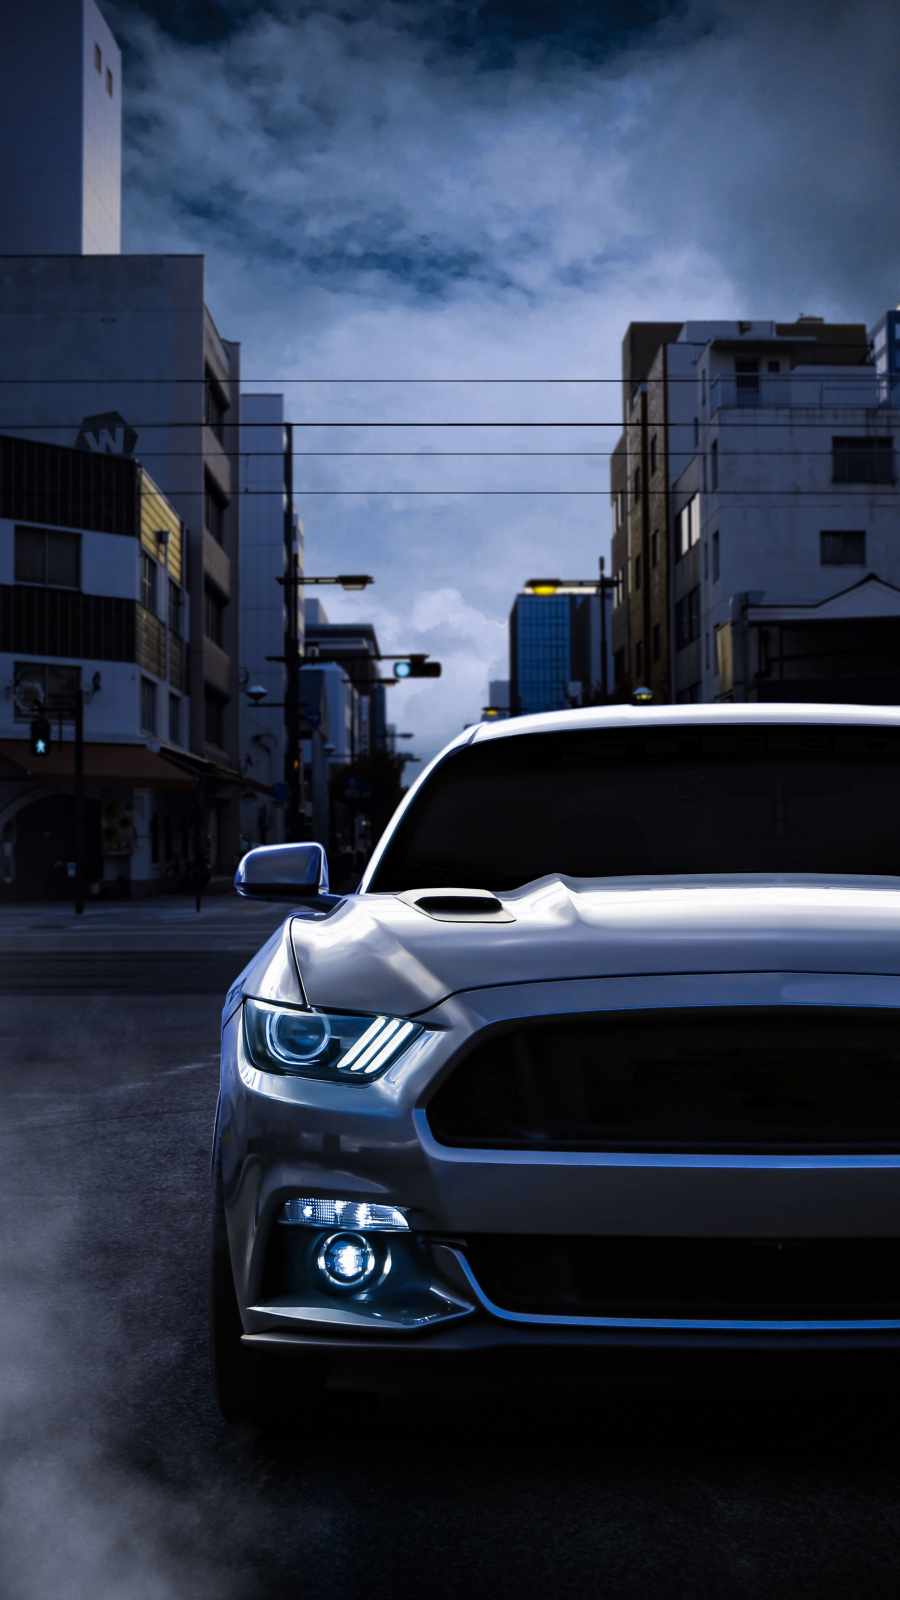 Urban Ford Mustang IPhone Wallpaper - IPhone Wallpapers : iPhone Wallpapers